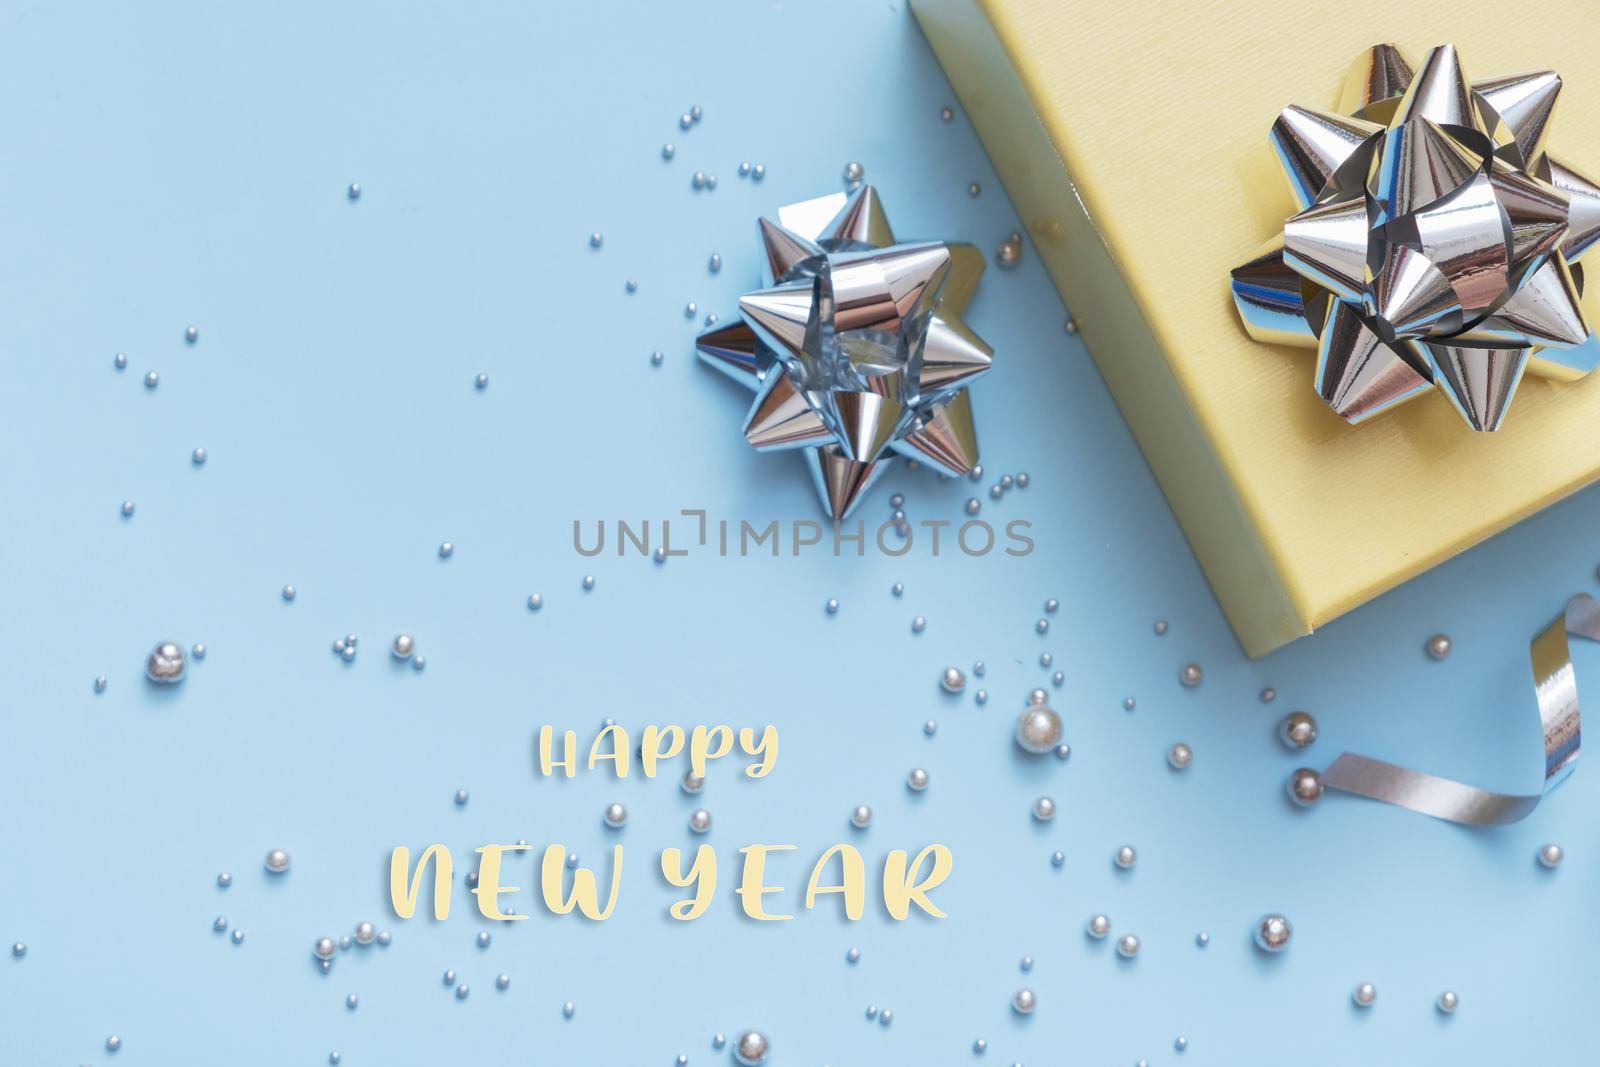 Happy New Year text with gift box, pearls and bows top view on festive blue background by ssvimaliss